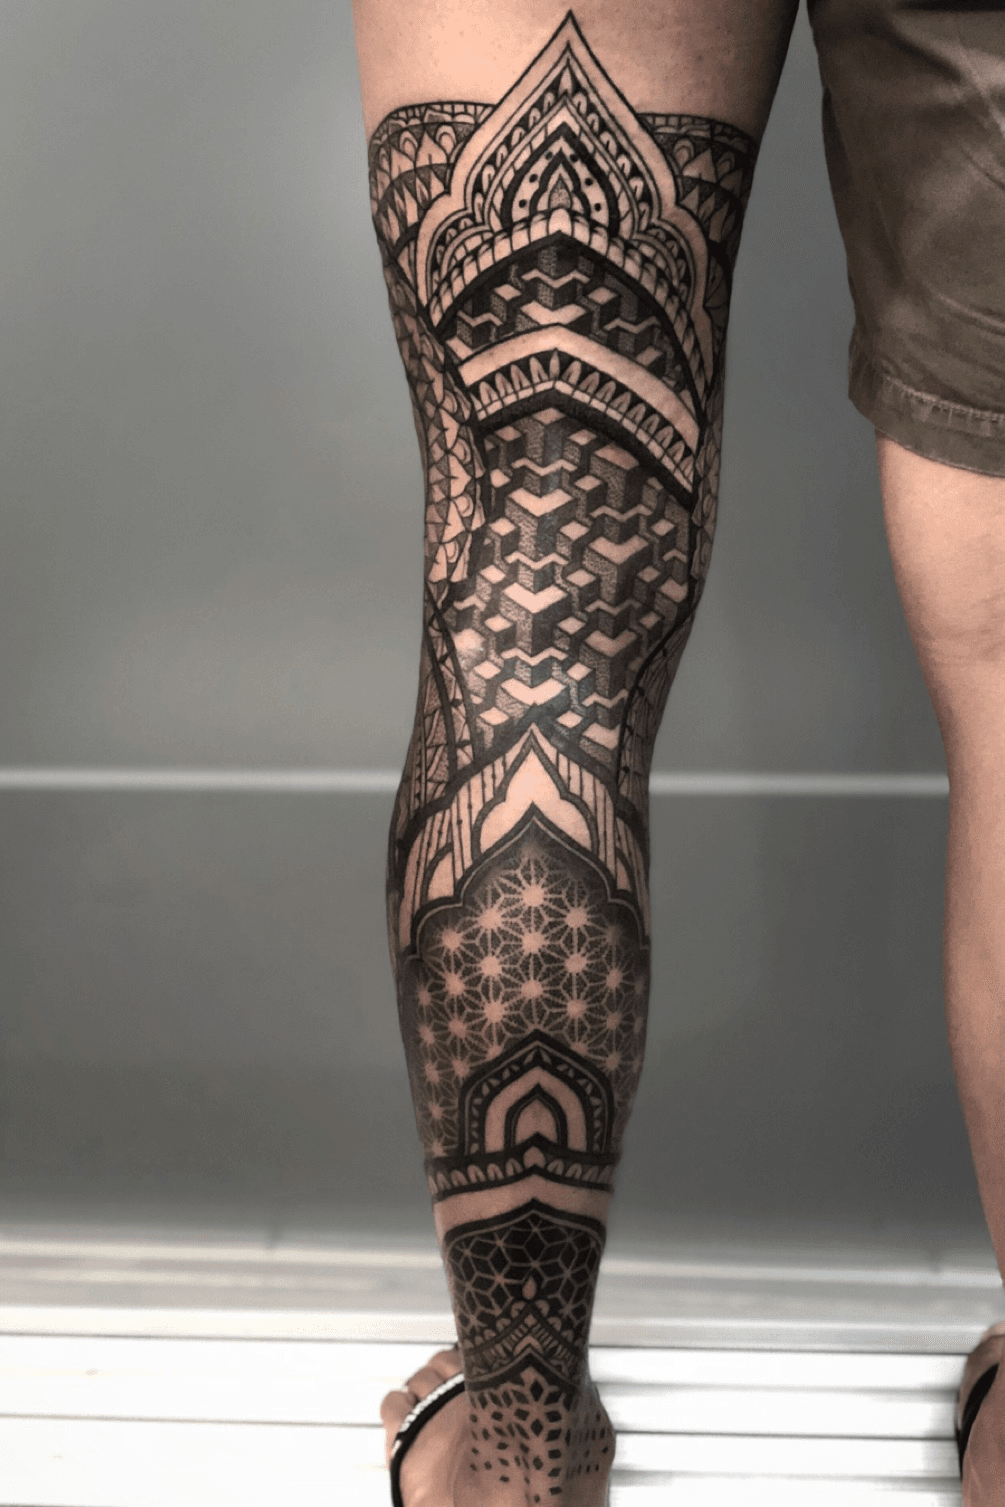 Dotwork and Mandala motifs  tattoos with a thousand years of tradition   TattooMed